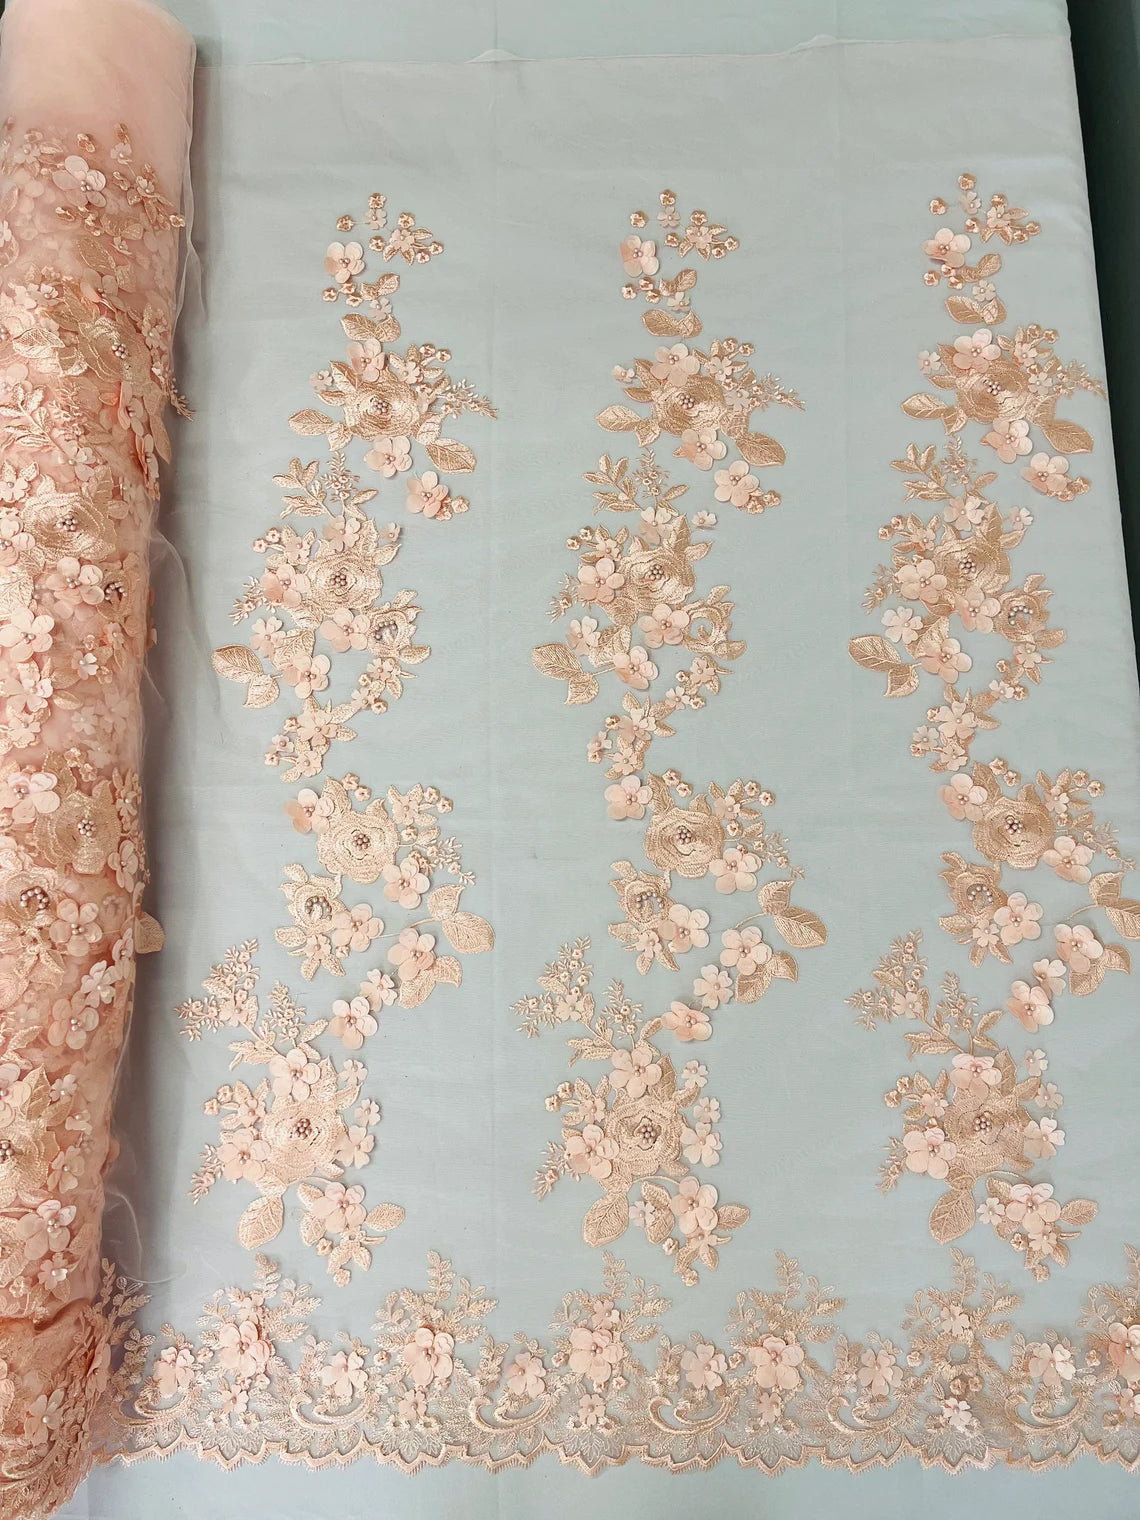 3D Flower Panels Fabric - Peach - Flower Panels Bead Embroidered on Lace Fabric Sold By Yard